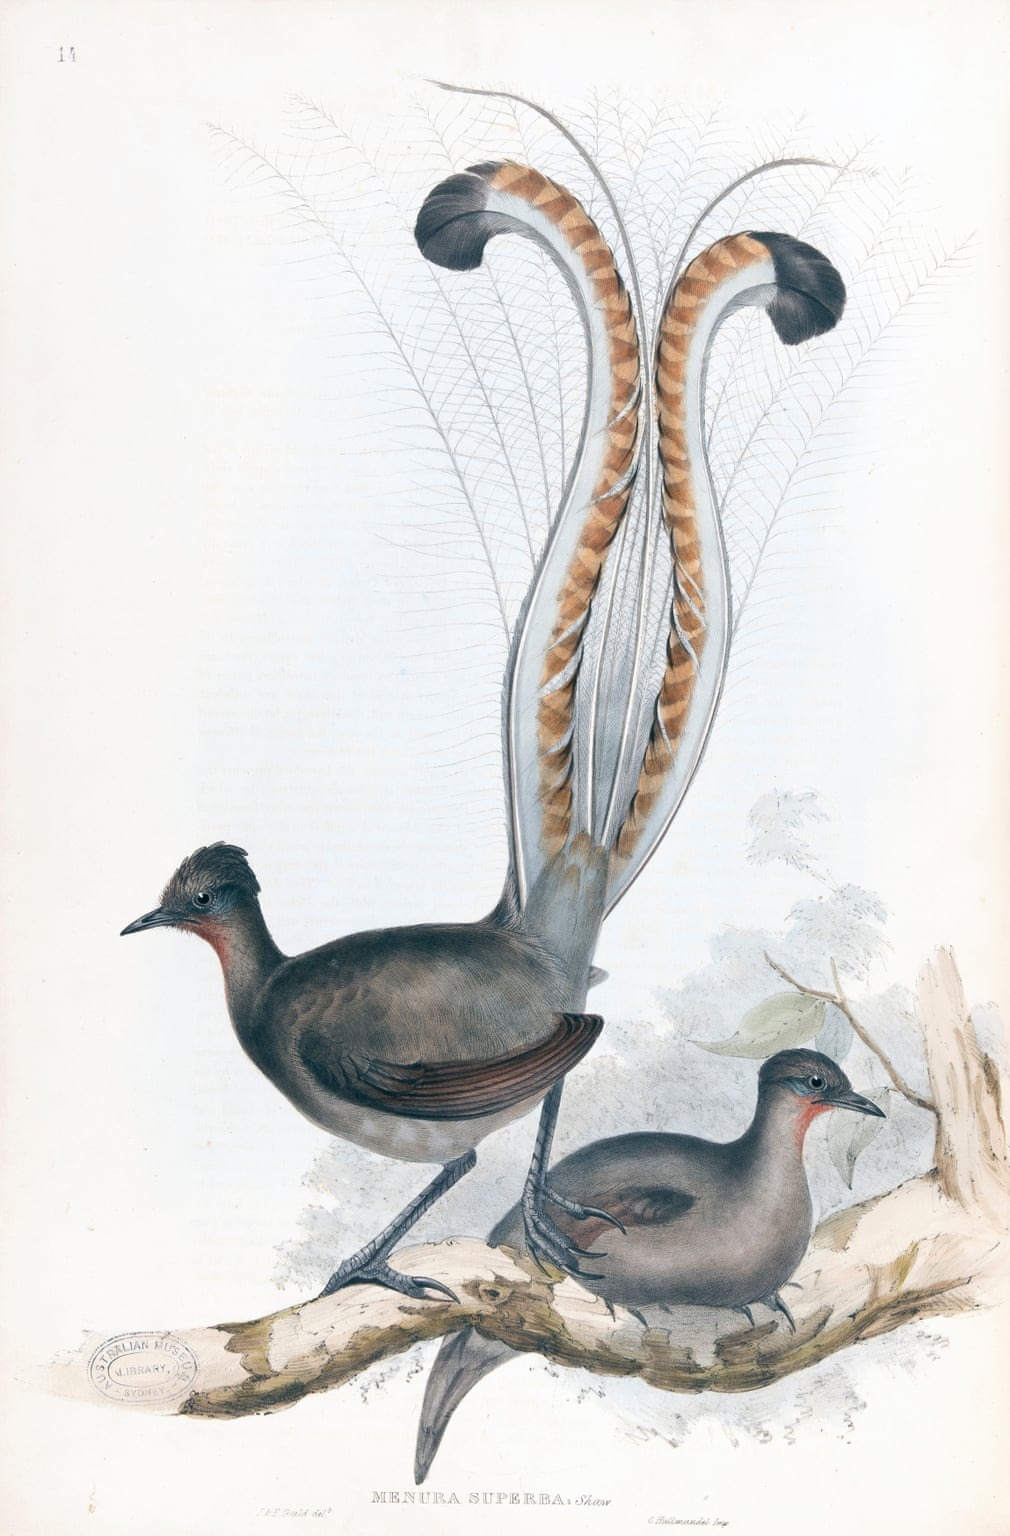 Birds Of Australia, Fascinating Illustrations From The 19th Century By Elizabeth Gould (8)